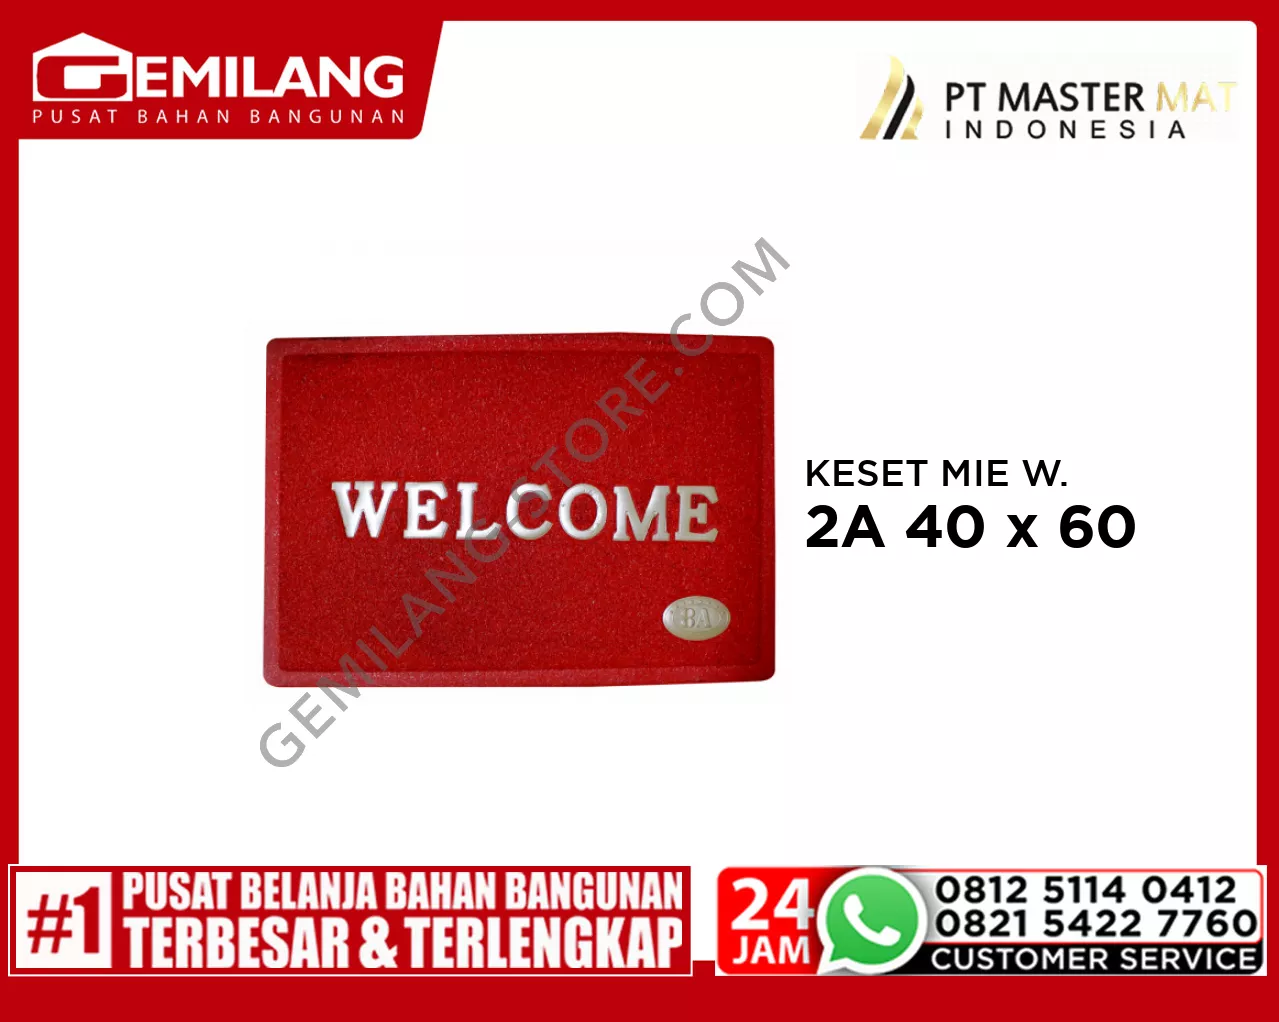 KESET MIE WELCOME 2A 40 x 60